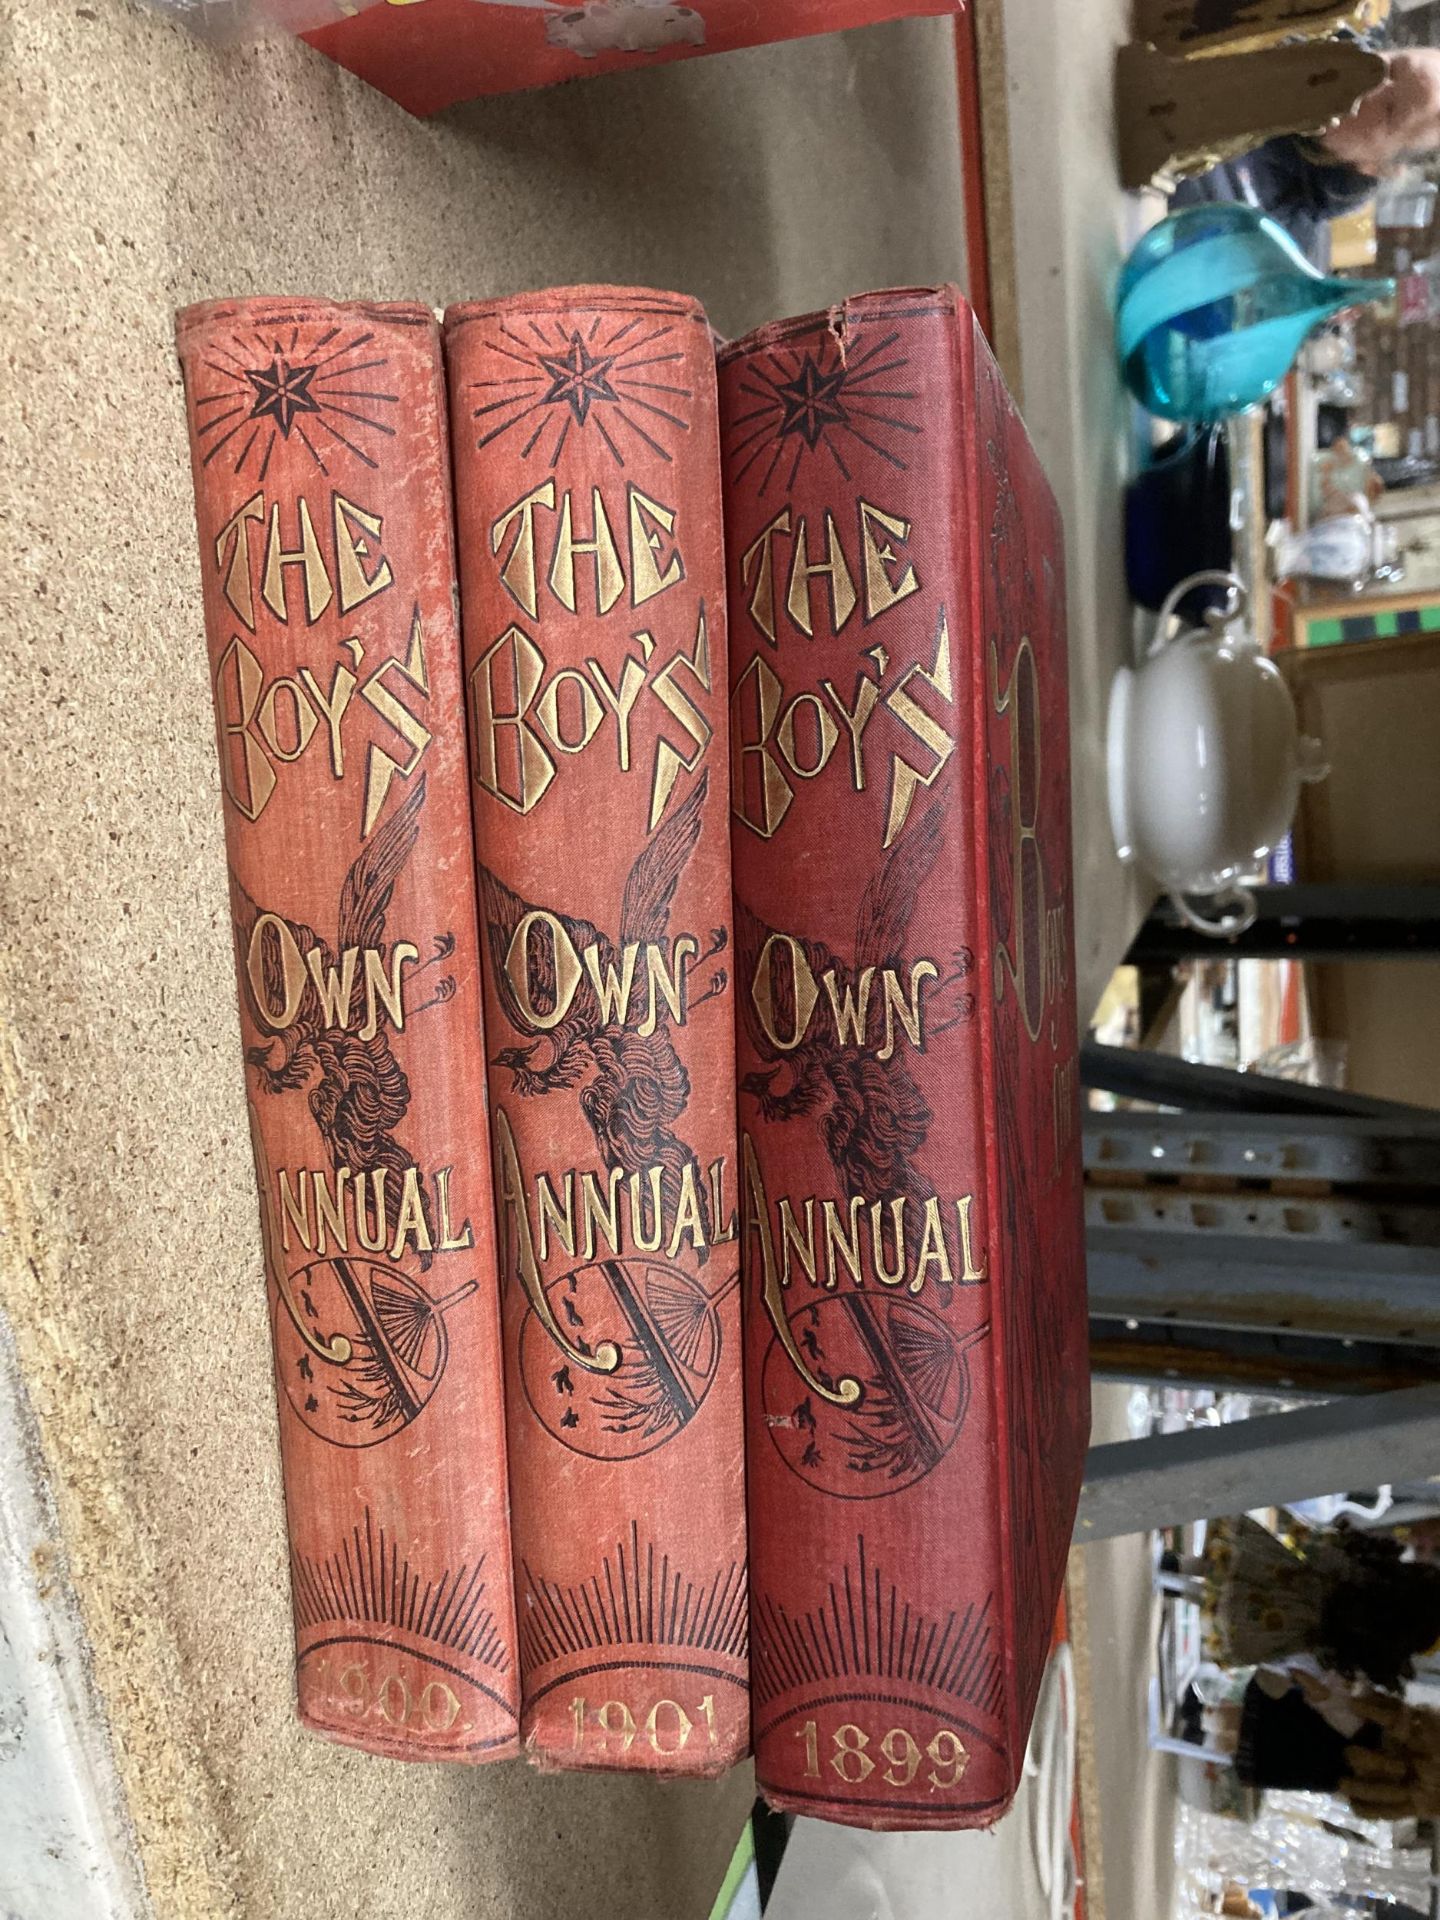 THREE VOLUMES OF BOYS OWN ANNUALS, 1899, 1900, 1901